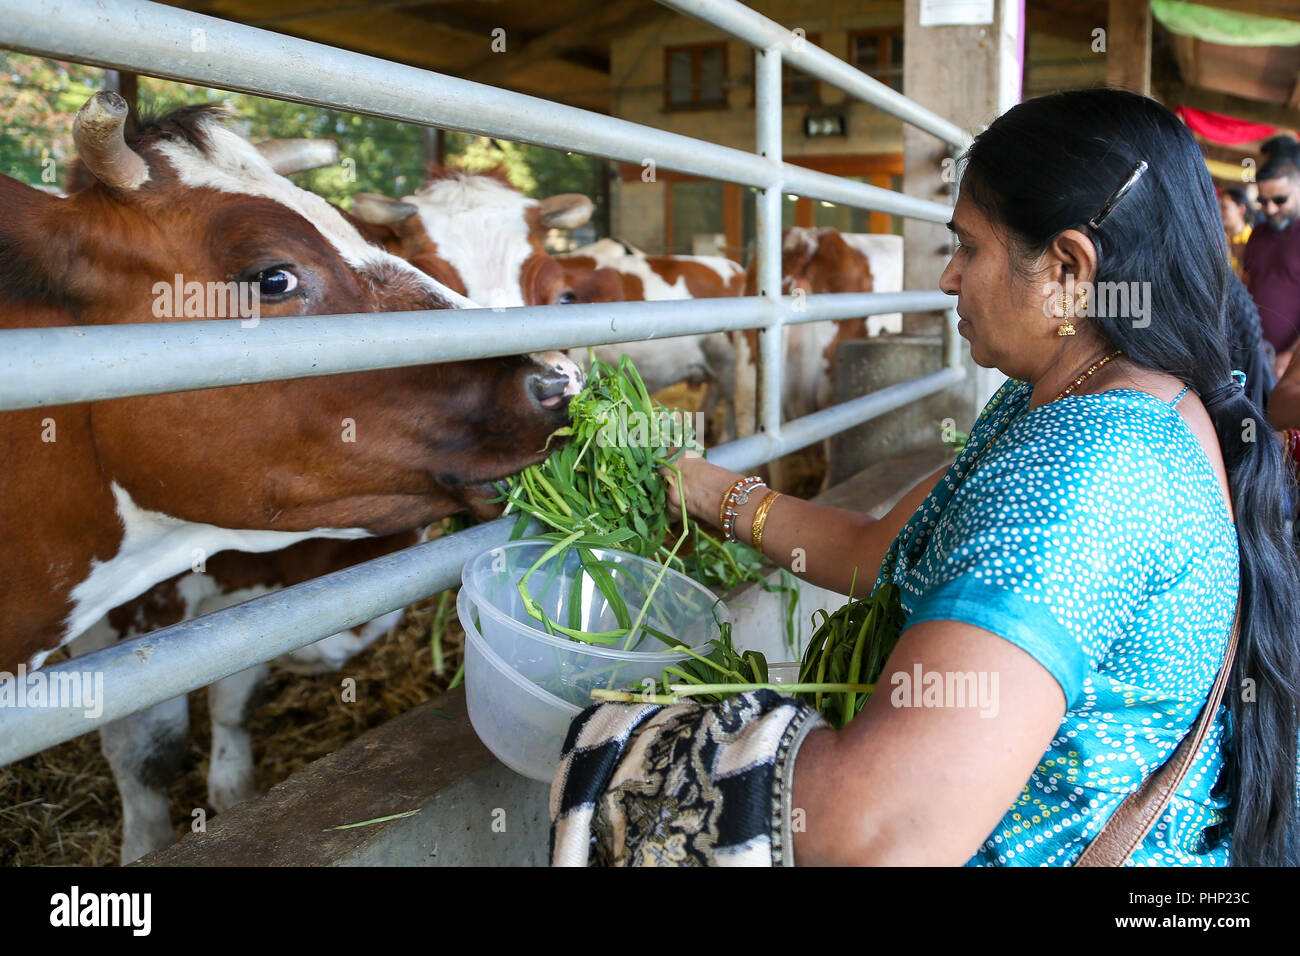 Watford Temple. Watford. UK 2 Sept 2018 - A woman feeds the cows in the cow shed at Bhaktivedanta Manor, the Hare Krishna Temple in Watford for the festival of Janmashtami   Janmashtami is a celebration of the birth of Lord Krishna, with tens of thousands of people attending over two days at Watford Temple, and is the largest such event outside India. Bhaktivedanta Manor commonly known as Watford Temple was donated to the Hare Krishna movement in the early 1970's by former Beatle George Harrison.  Credit: Dinendra Haria/Alamy Live News Stock Photo